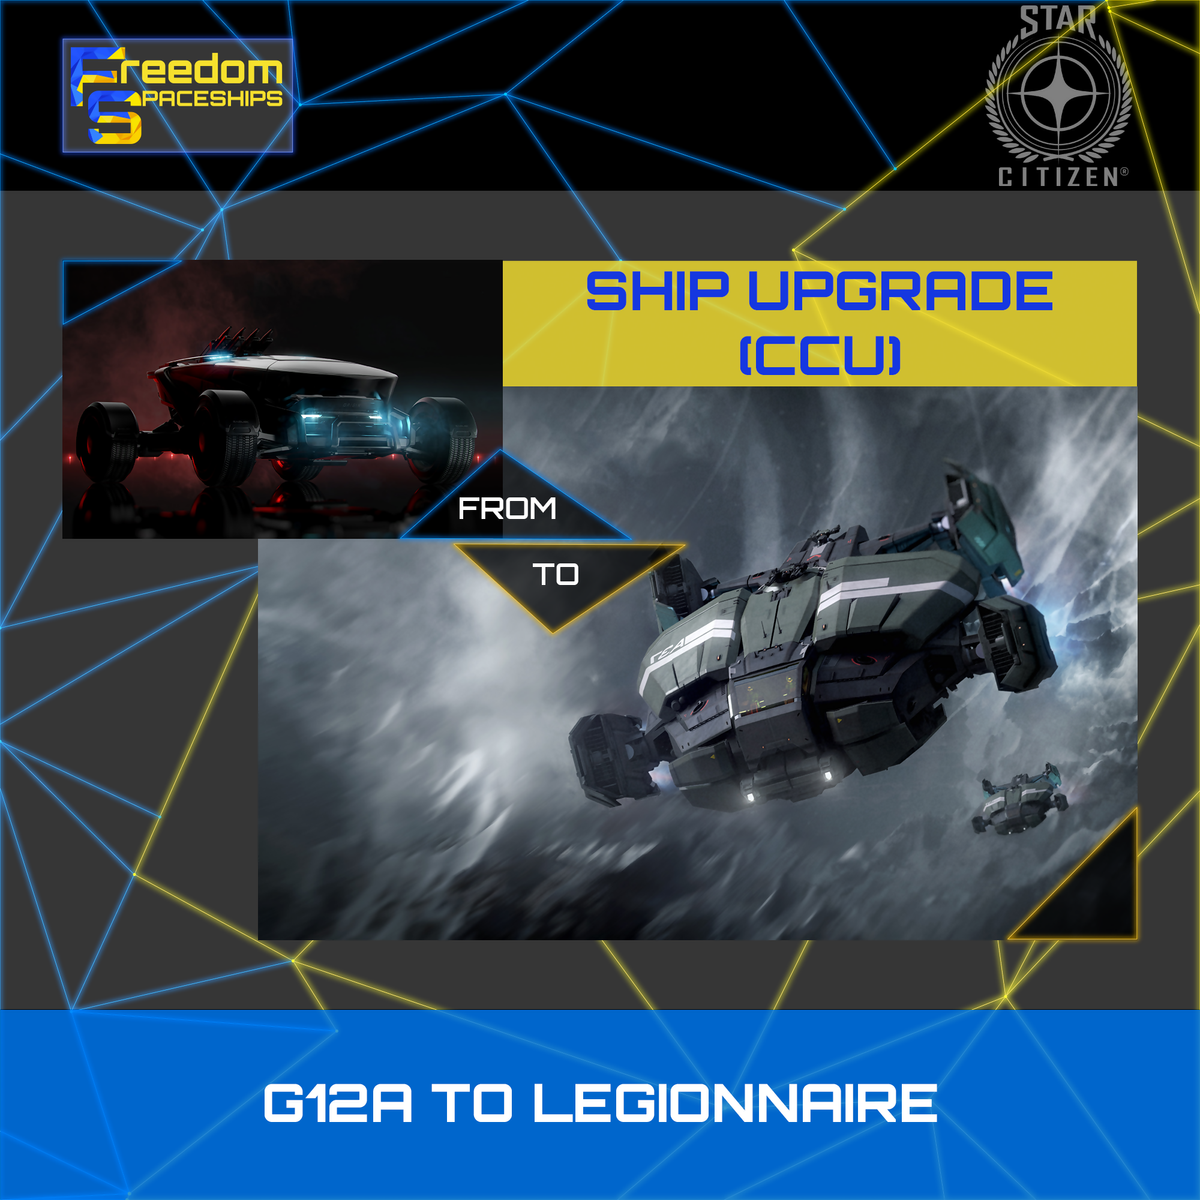 Upgrade - G12A to Legionnaire